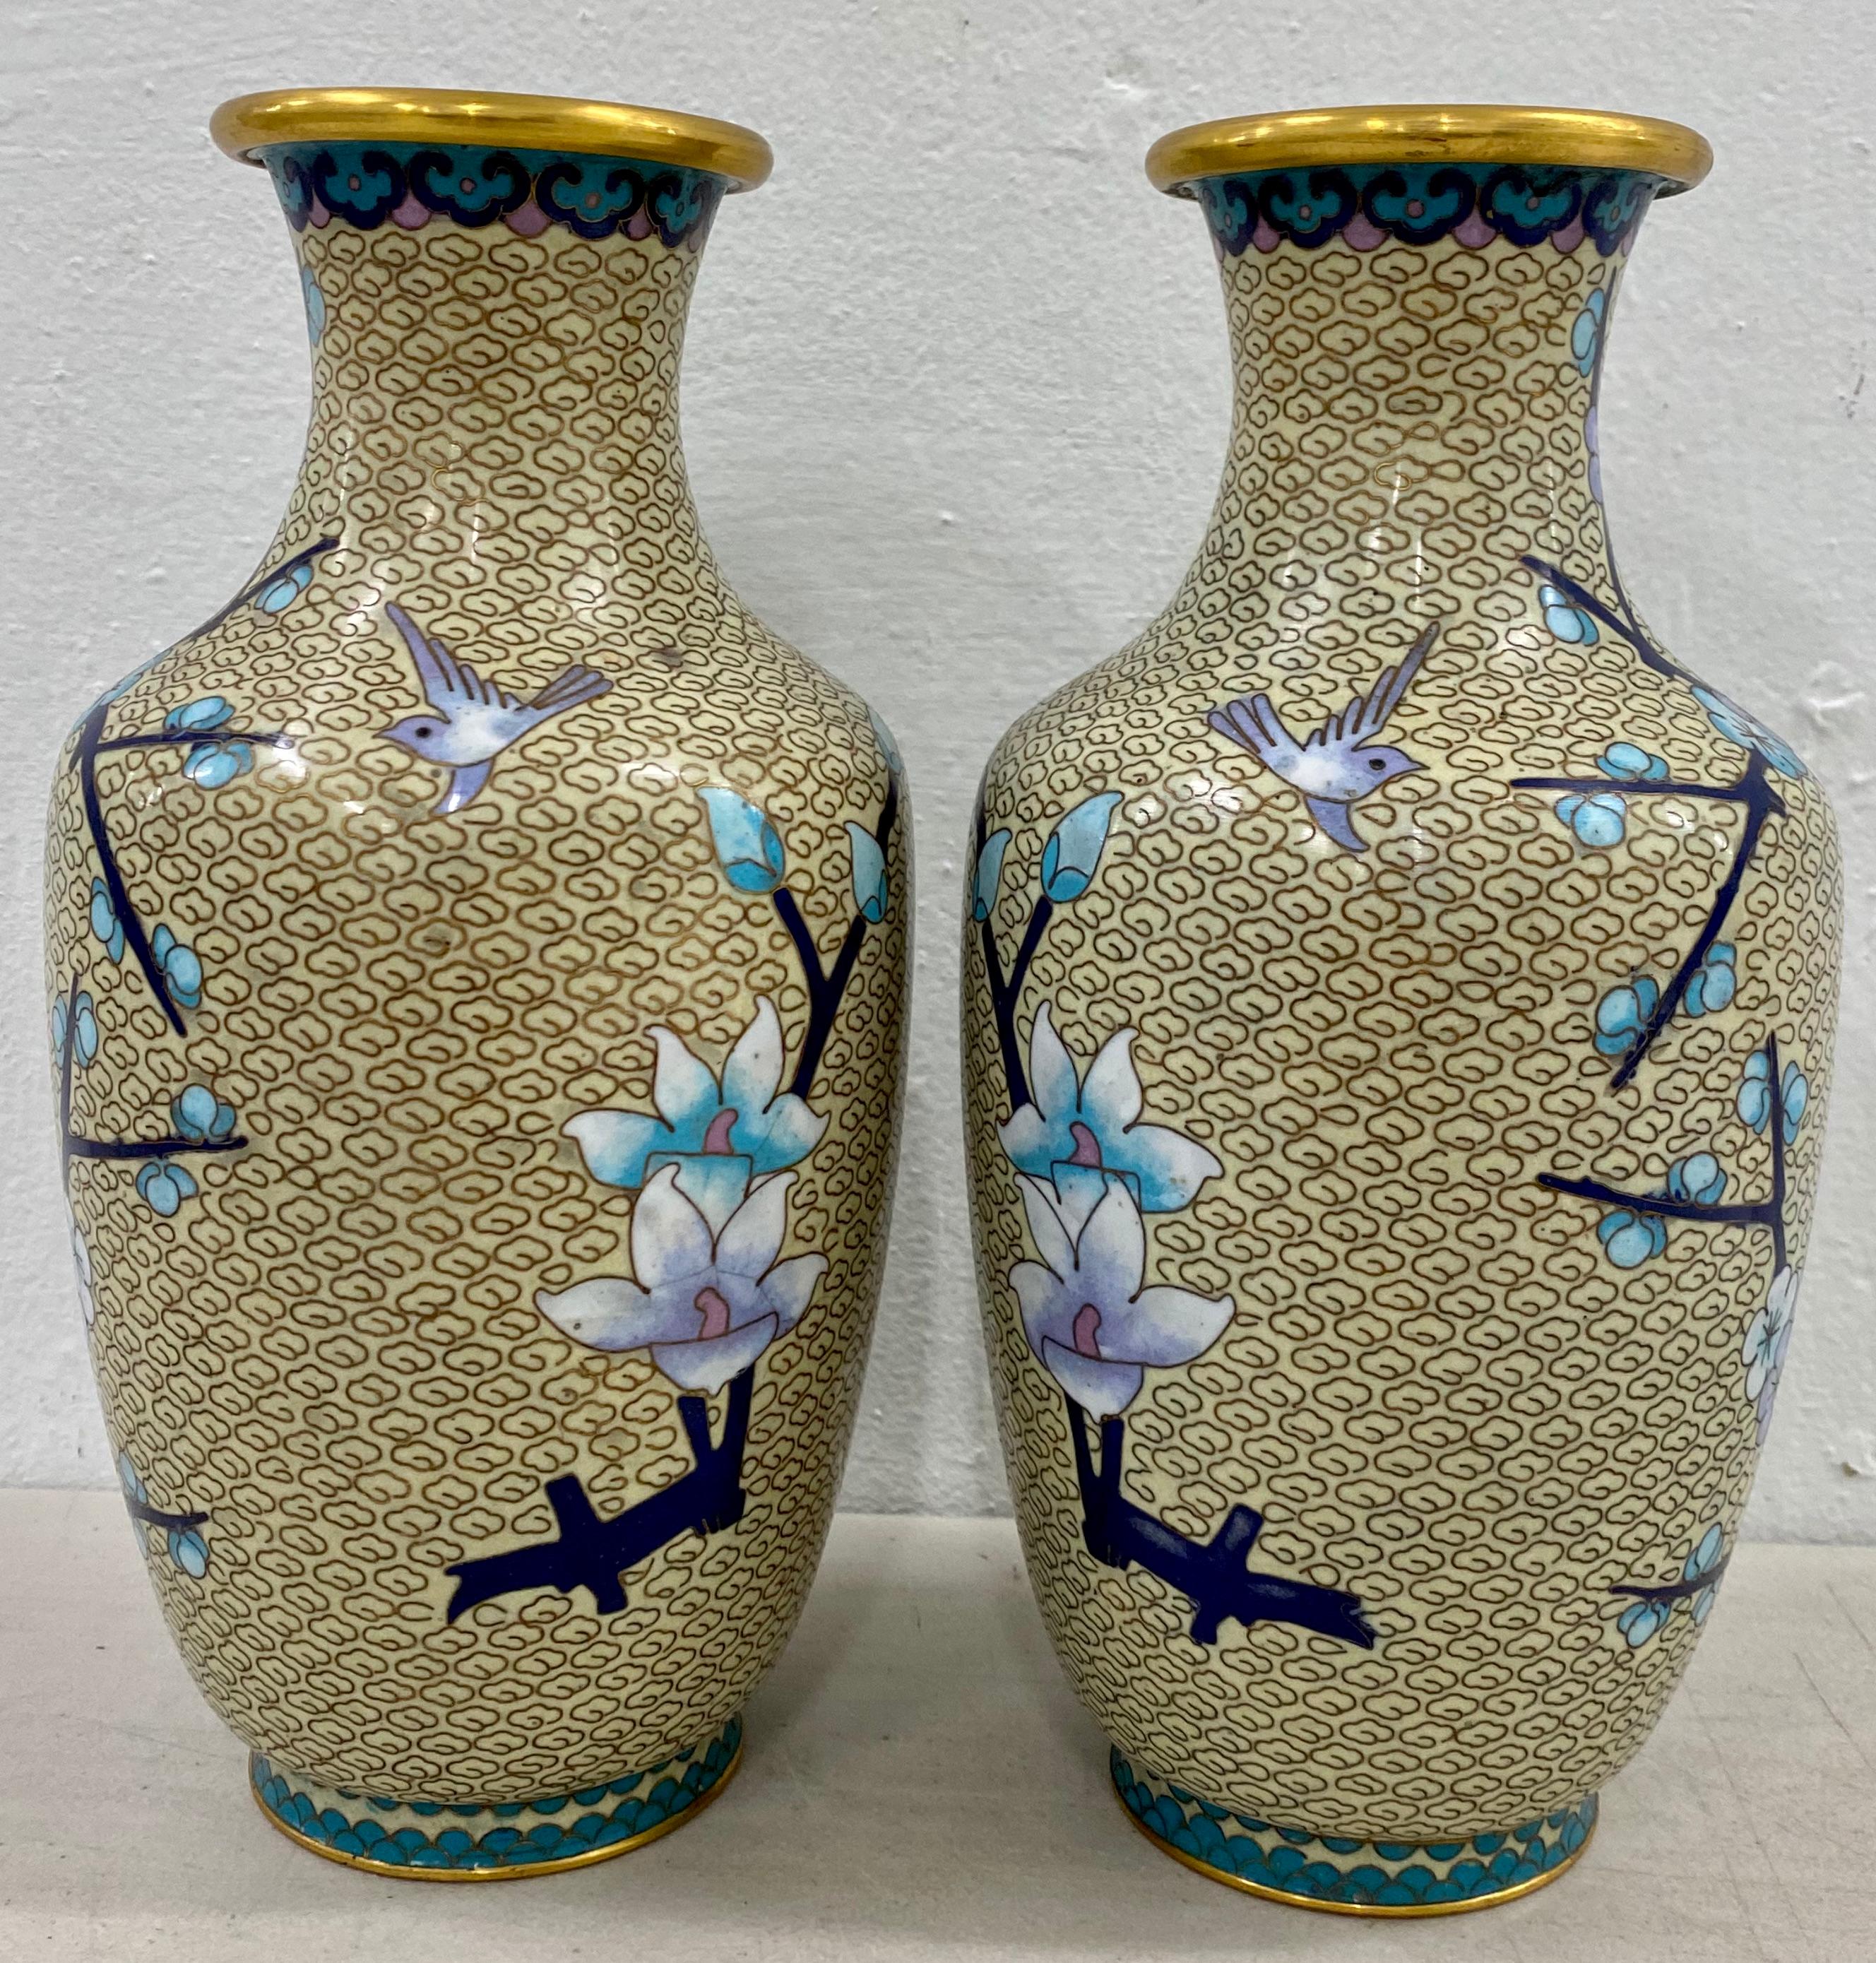 Cloisonne vases, a pair - early to mid 20th century

Gorgeous motif of cherry blossoms in blue and birds agains a lovely cream background

Measures: 3